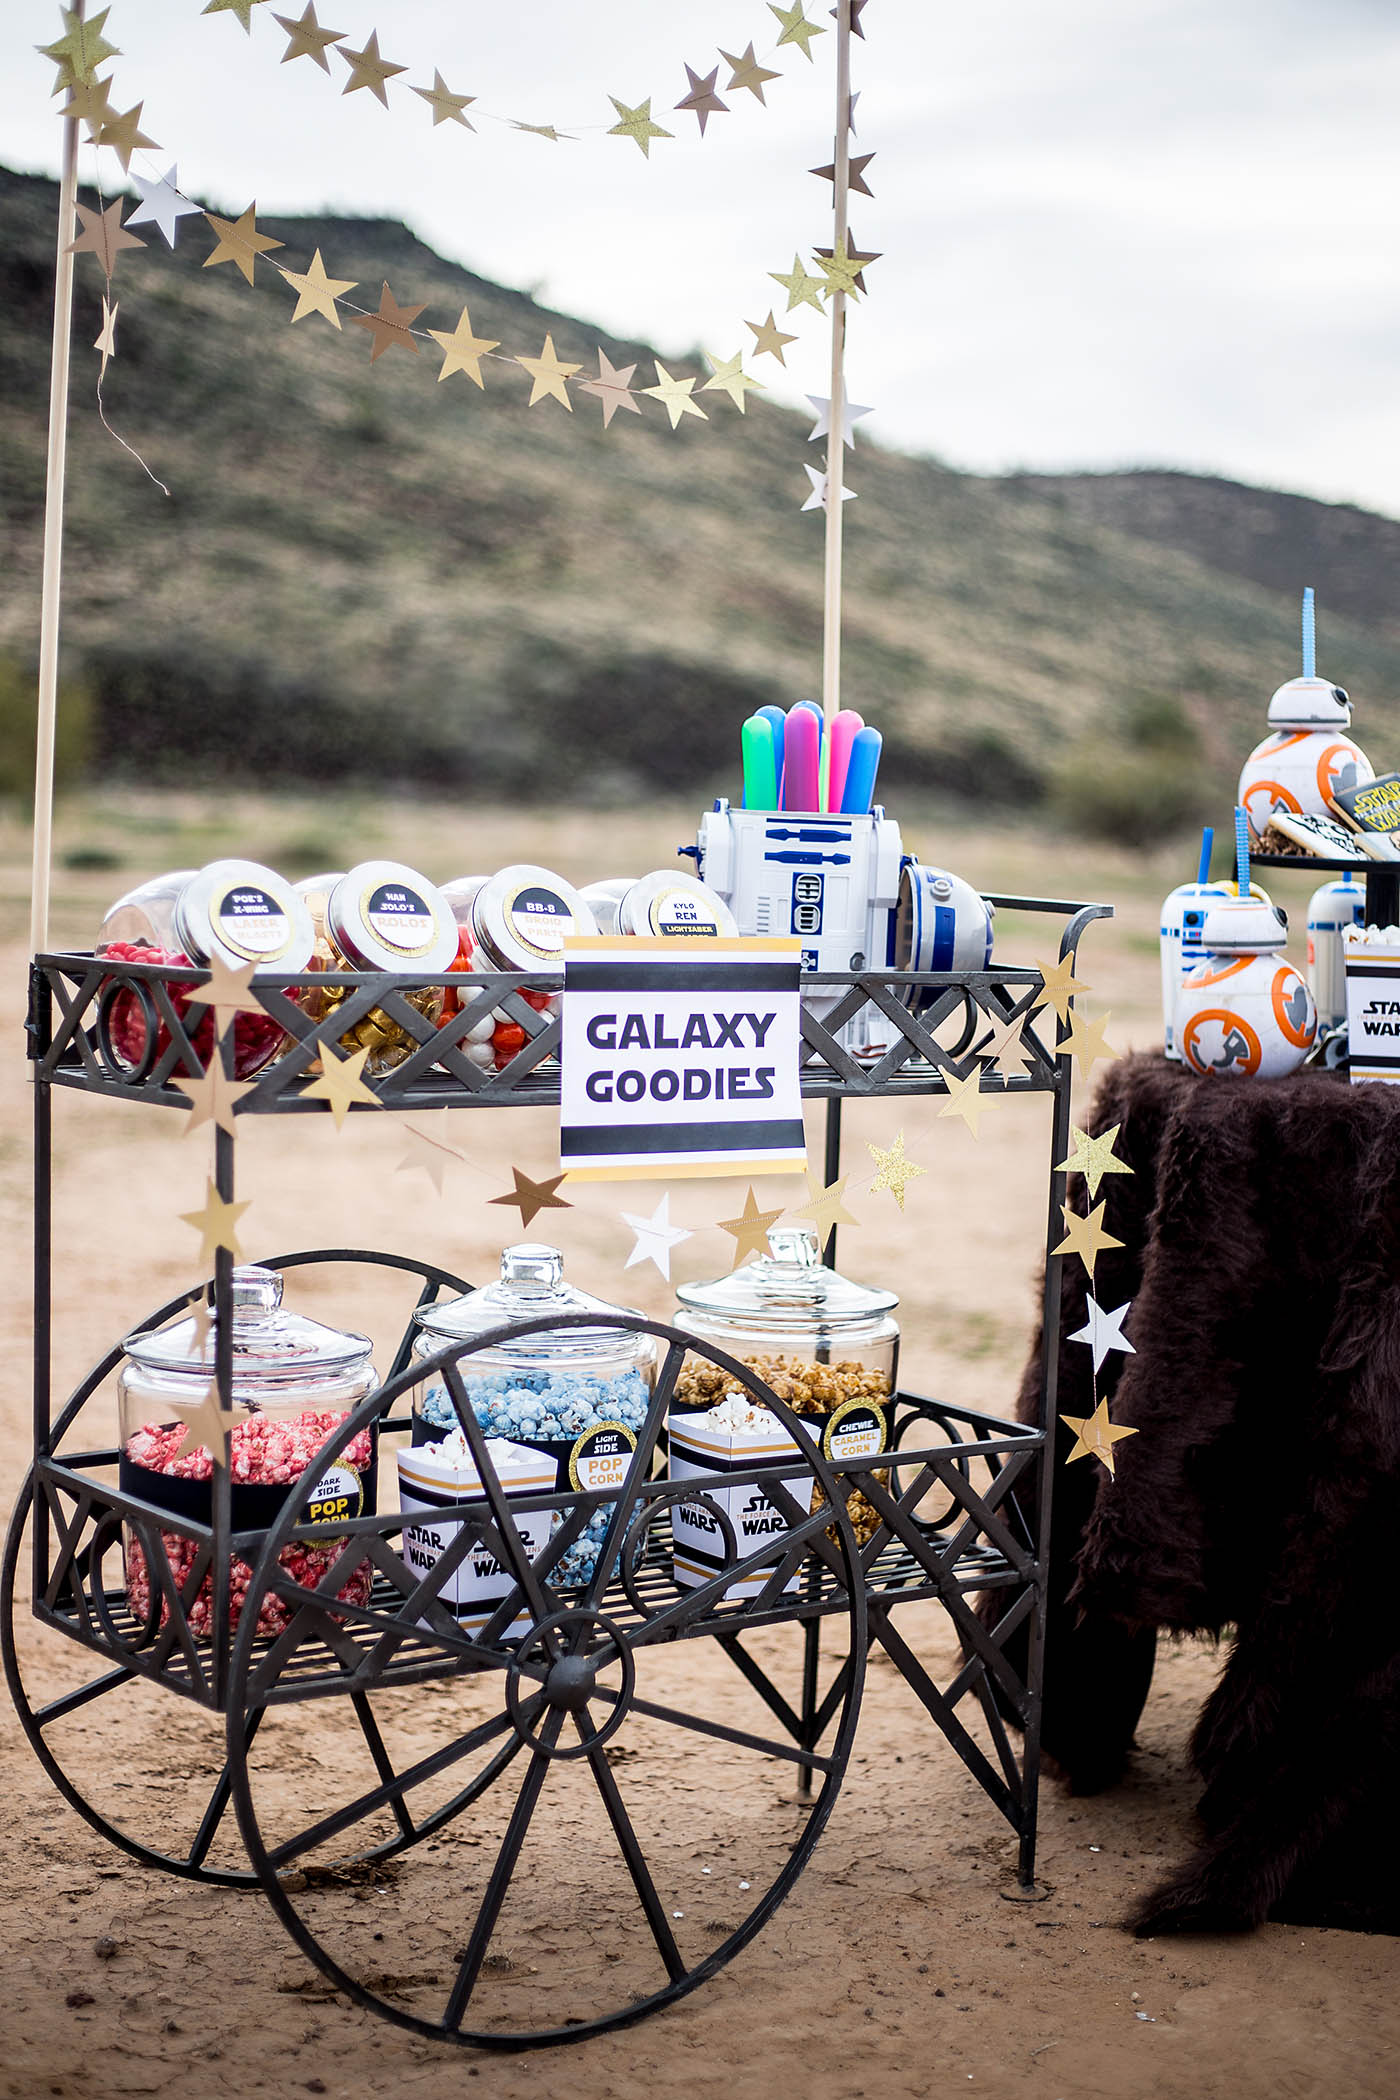 Star Wars: The Force Awakens outdoor movie night birthday party! Treats, printables, cardboard ships and more!